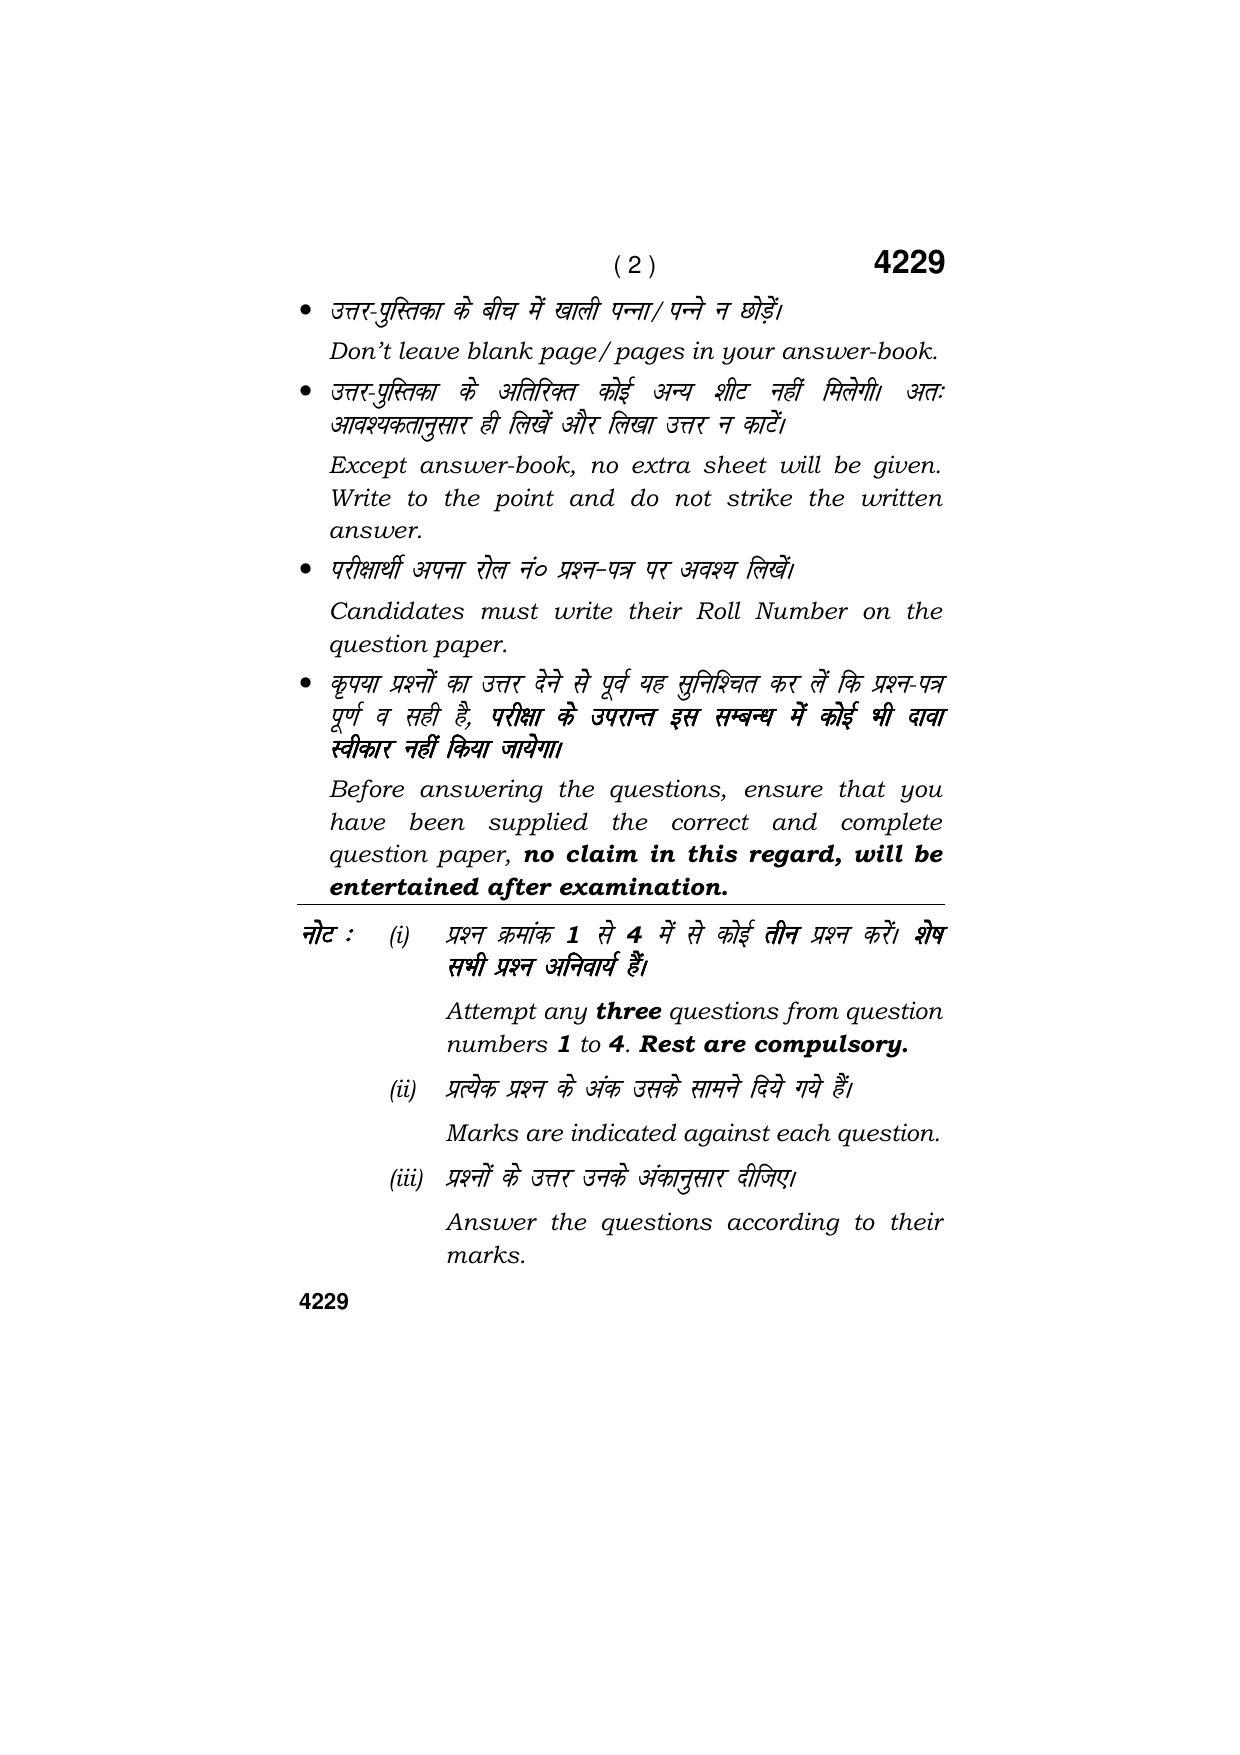 Haryana Board HBSE Class 10 Beauty & Wellness 2019 Question Paper - Page 2